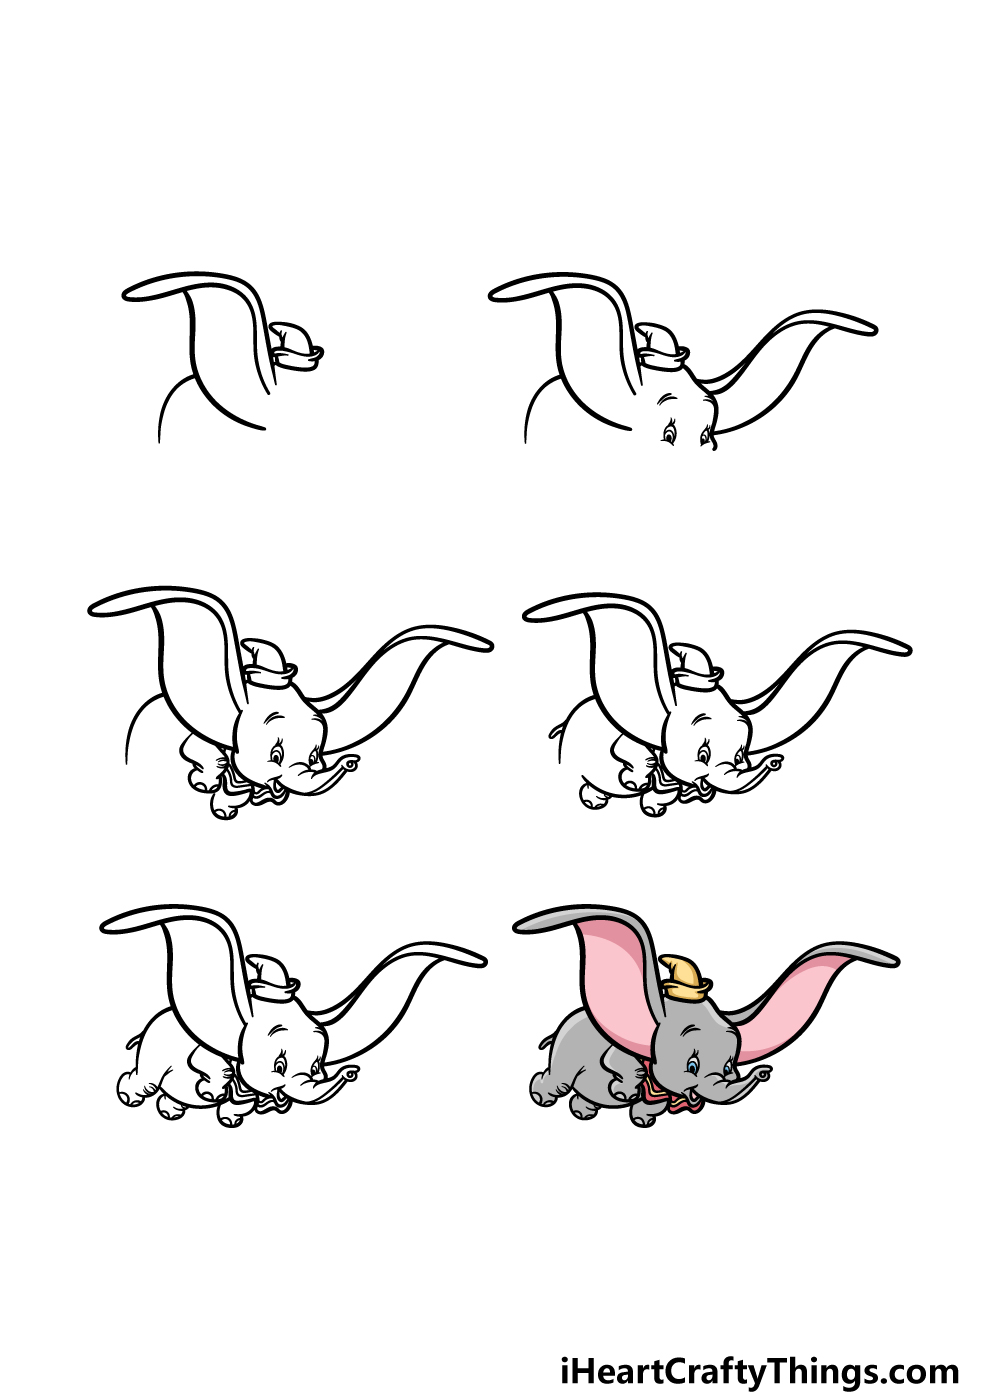 how to draw Dumbo in 6 steps